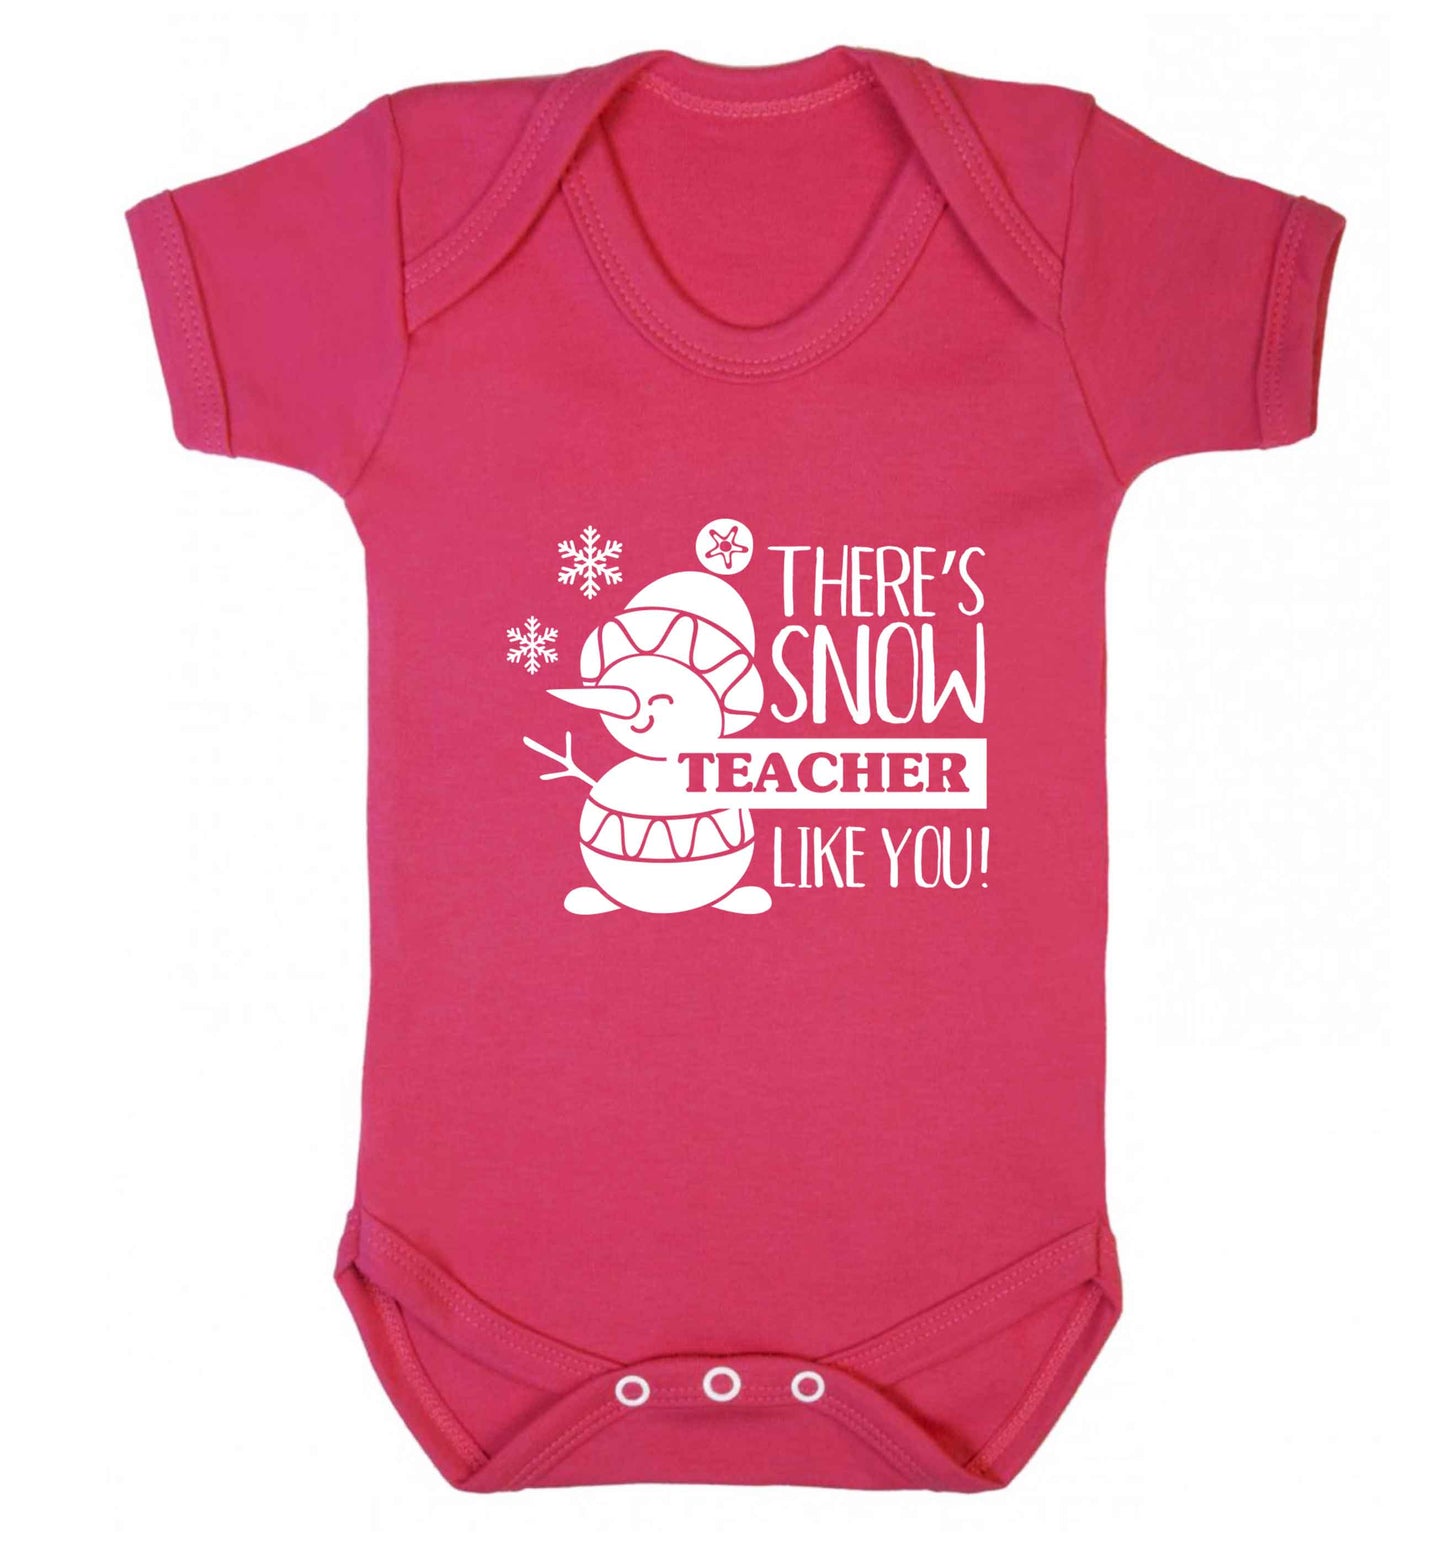 There's snow teacher like you baby vest dark pink 18-24 months